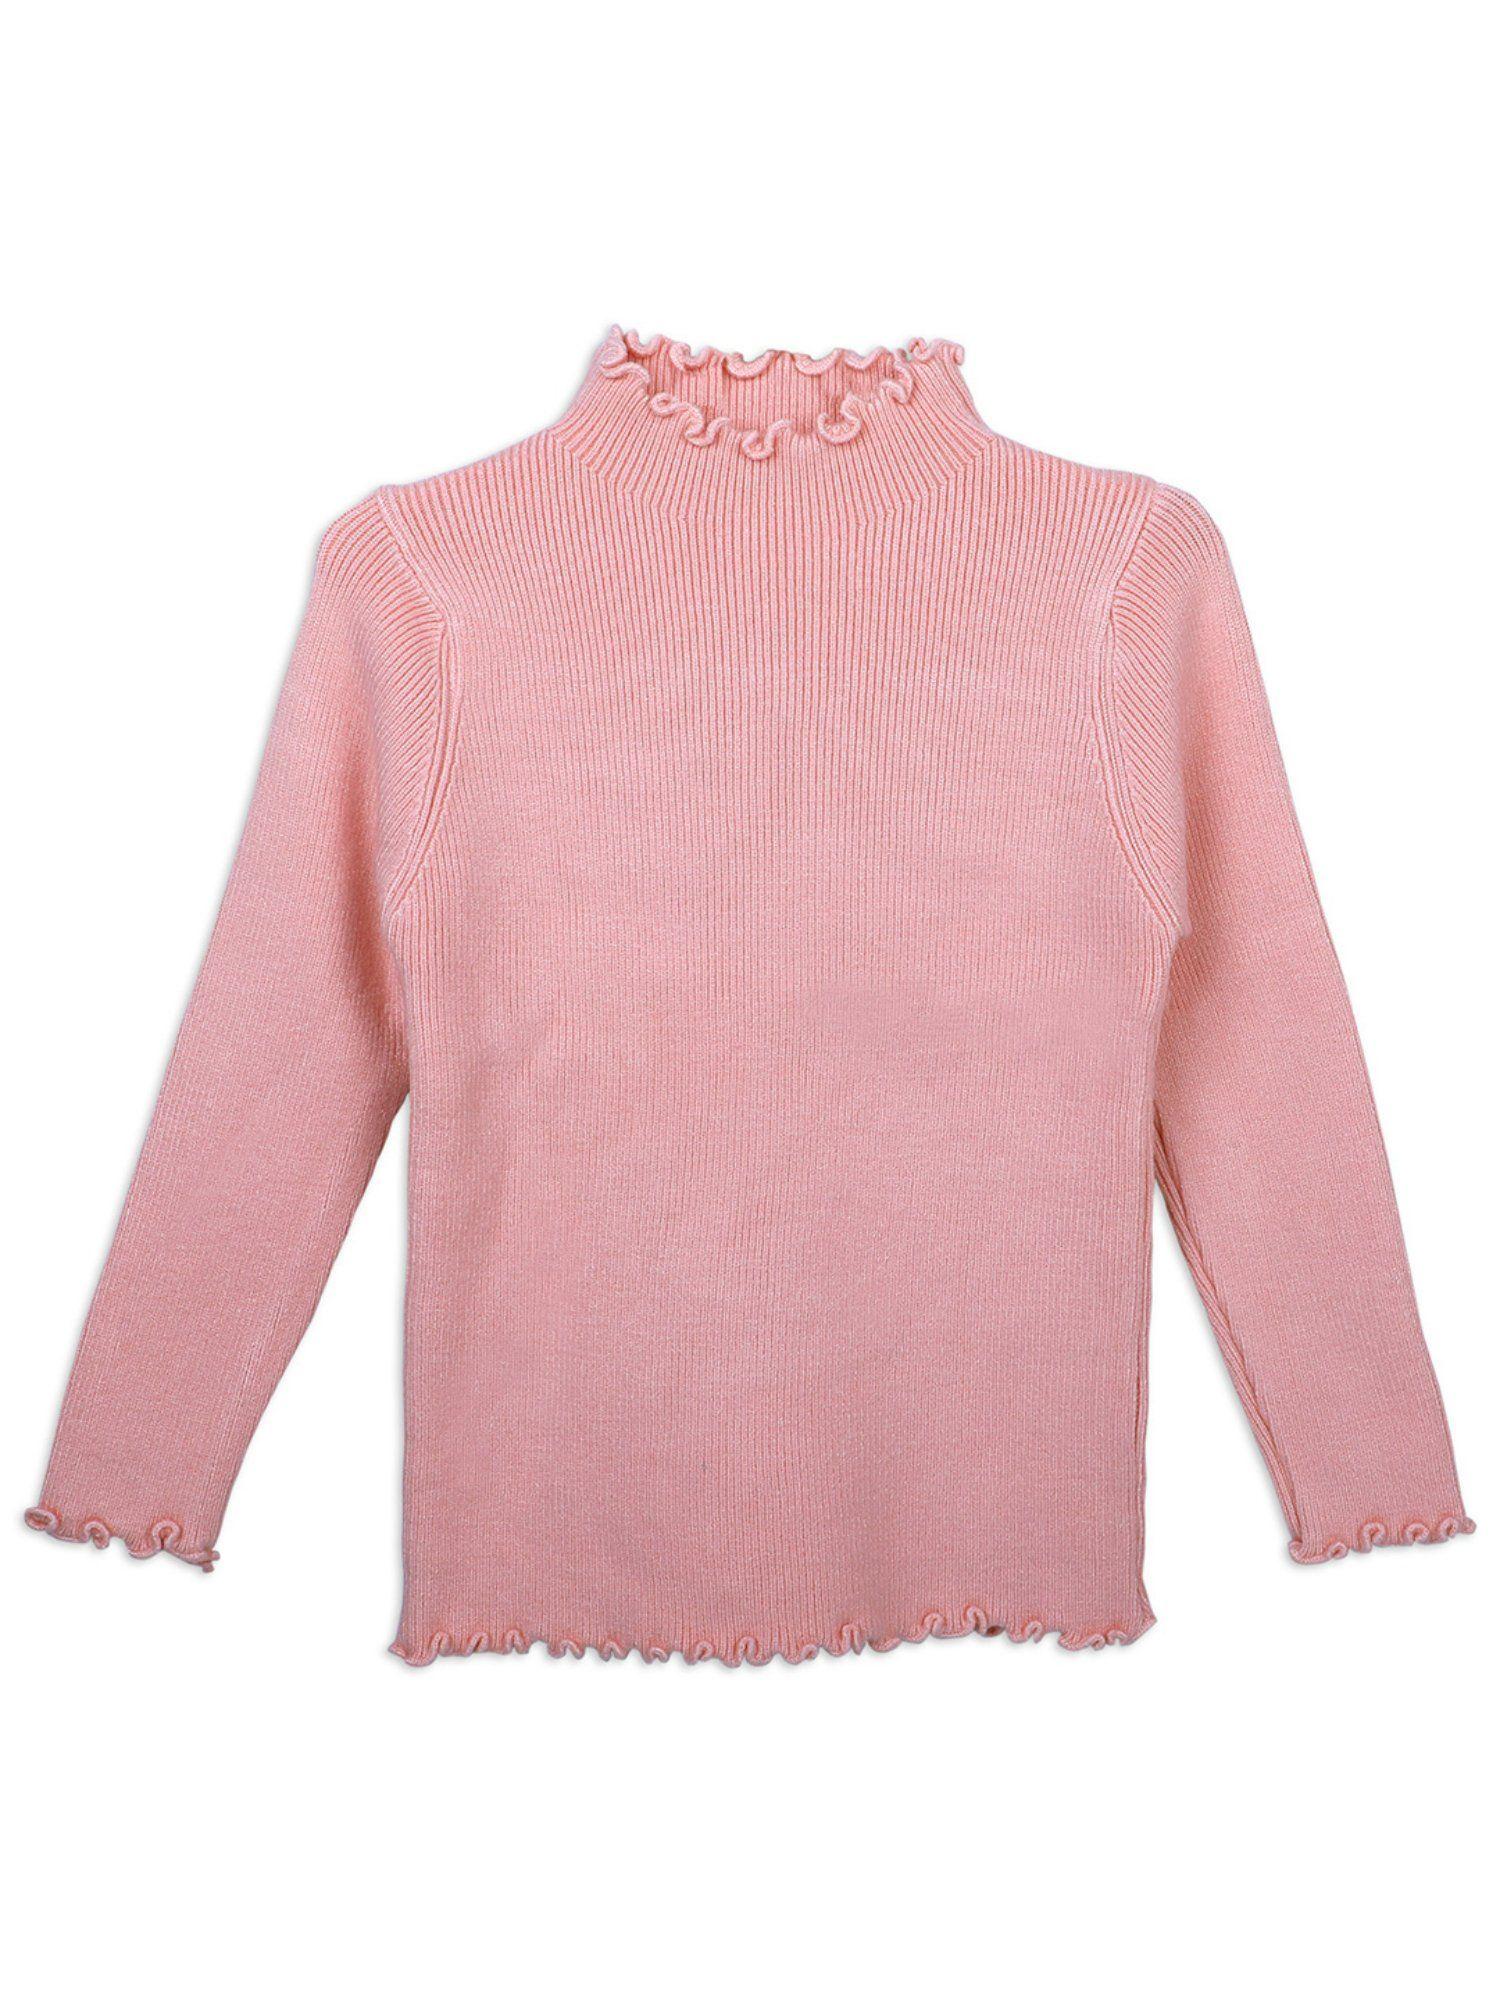 basic-ribbed-premium-full-sleeves-knitted-kids-sweater-pink